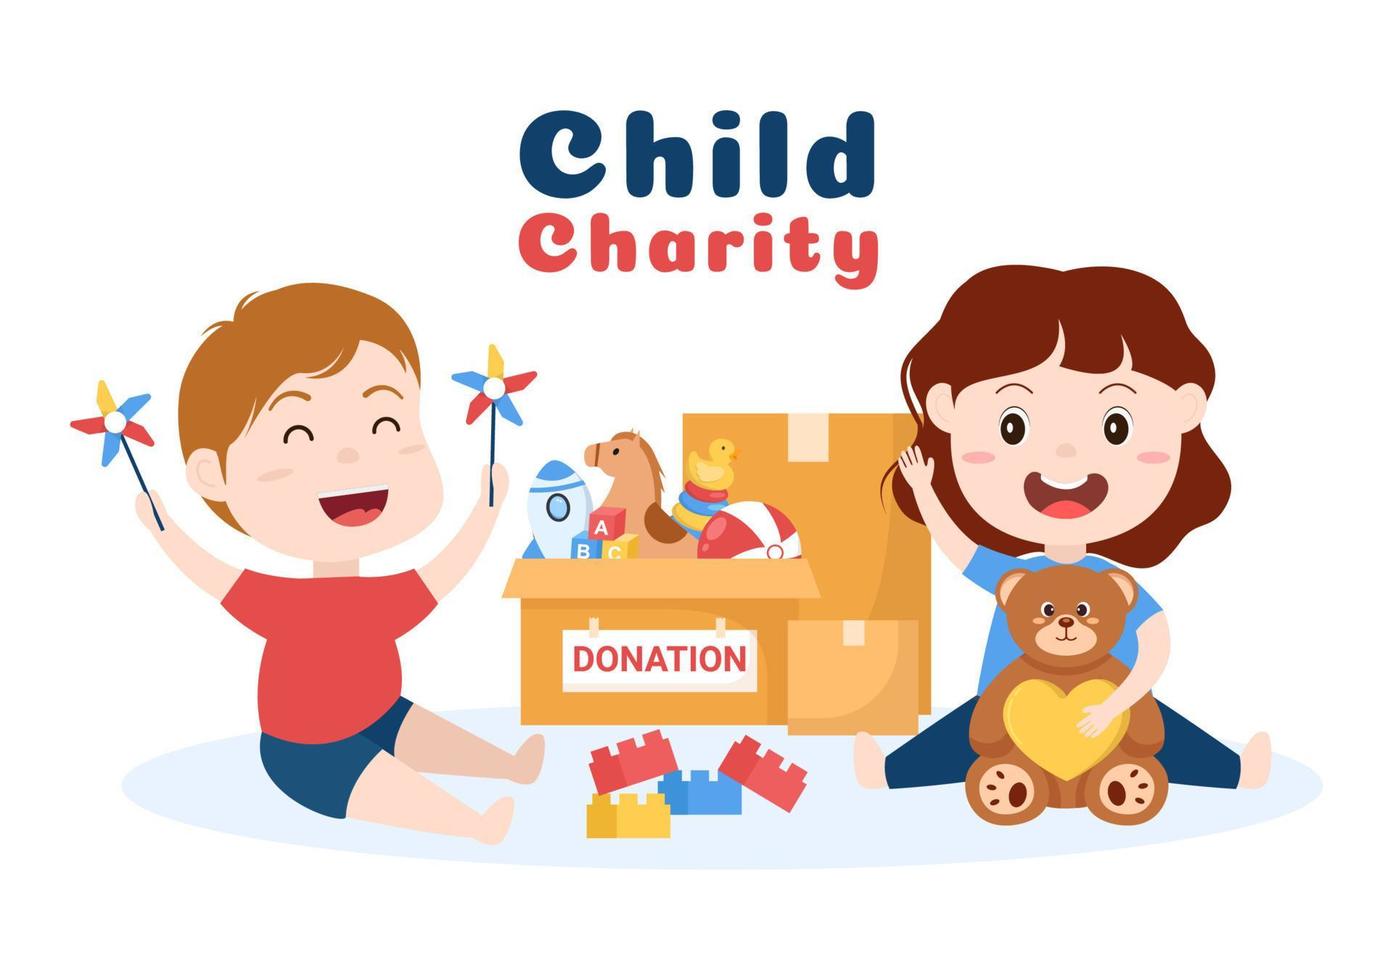 Cardboard Donation Box Containing Toys for Children, Social Care, Volunteering and Charity in Hand Drawn Cartoon Flat Illustration vector